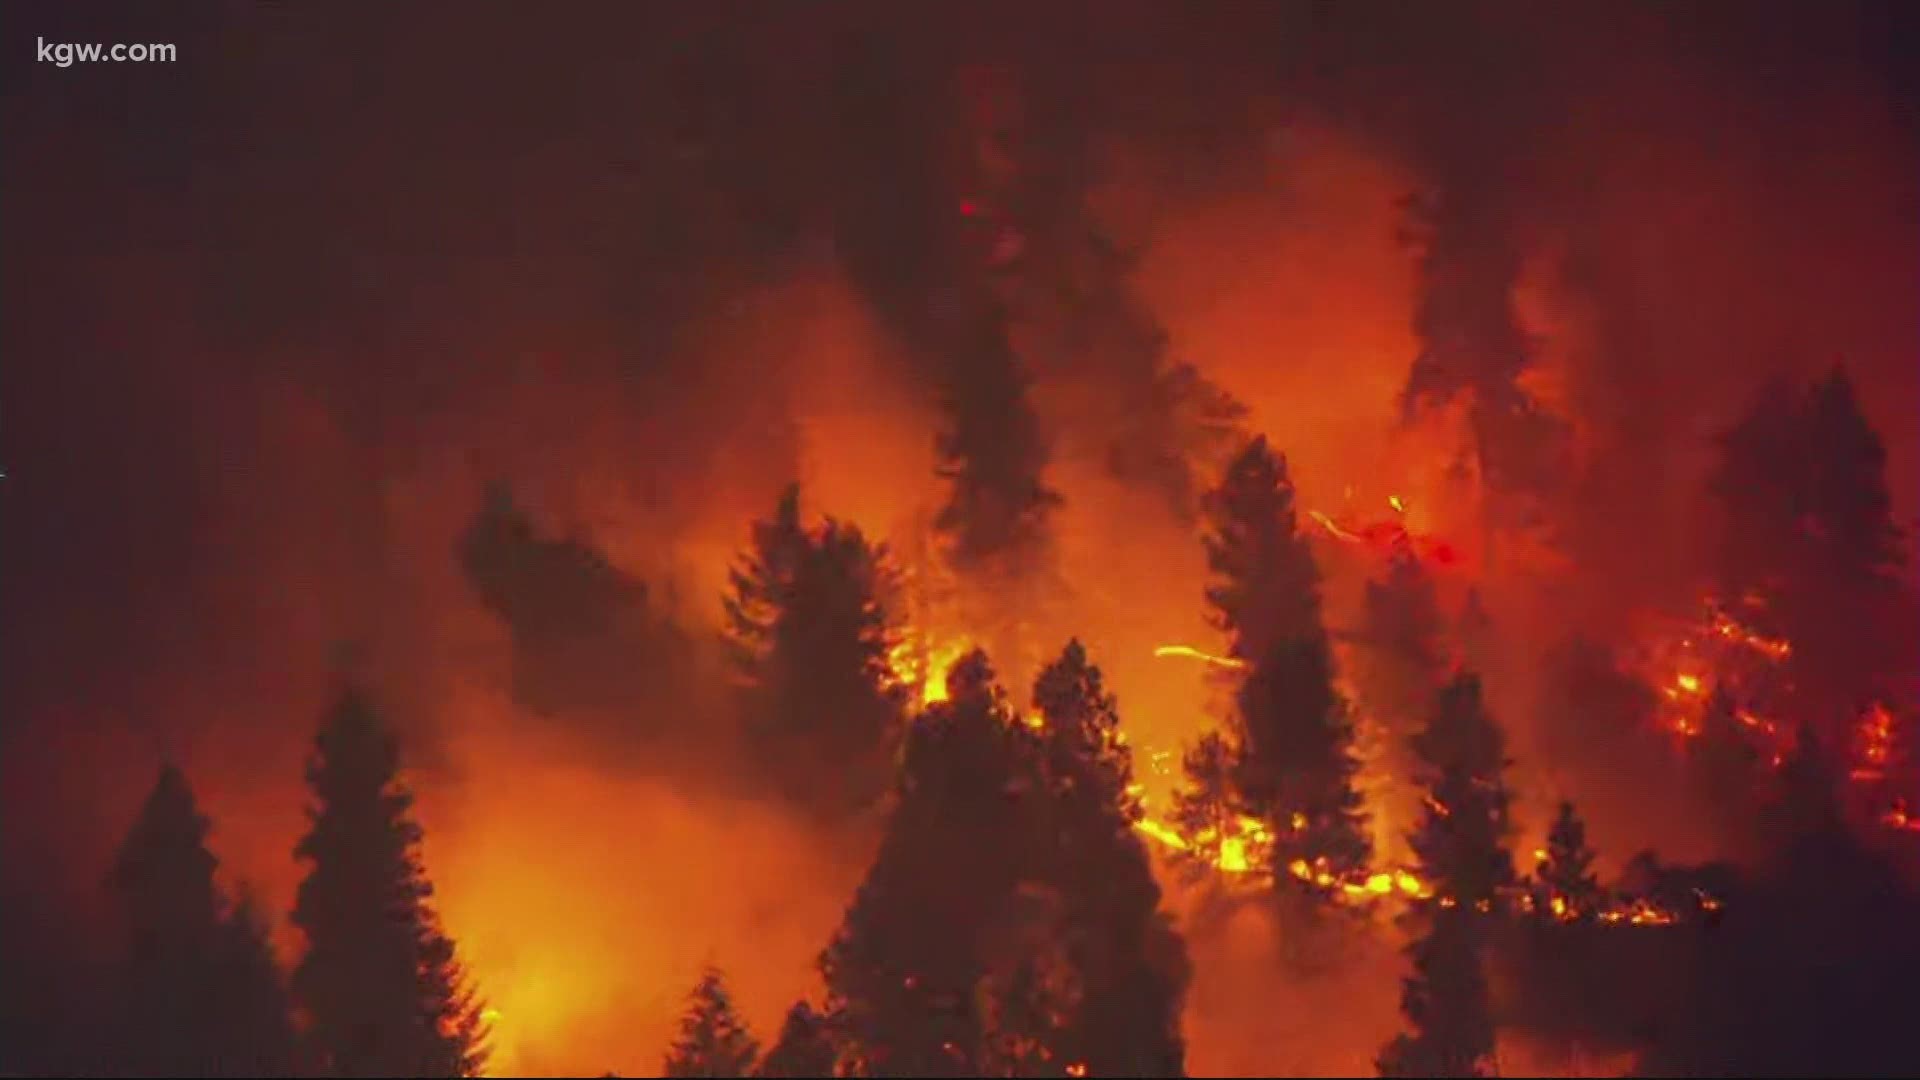 Gov. Kate Brown said the fire is threatening 300 homes.